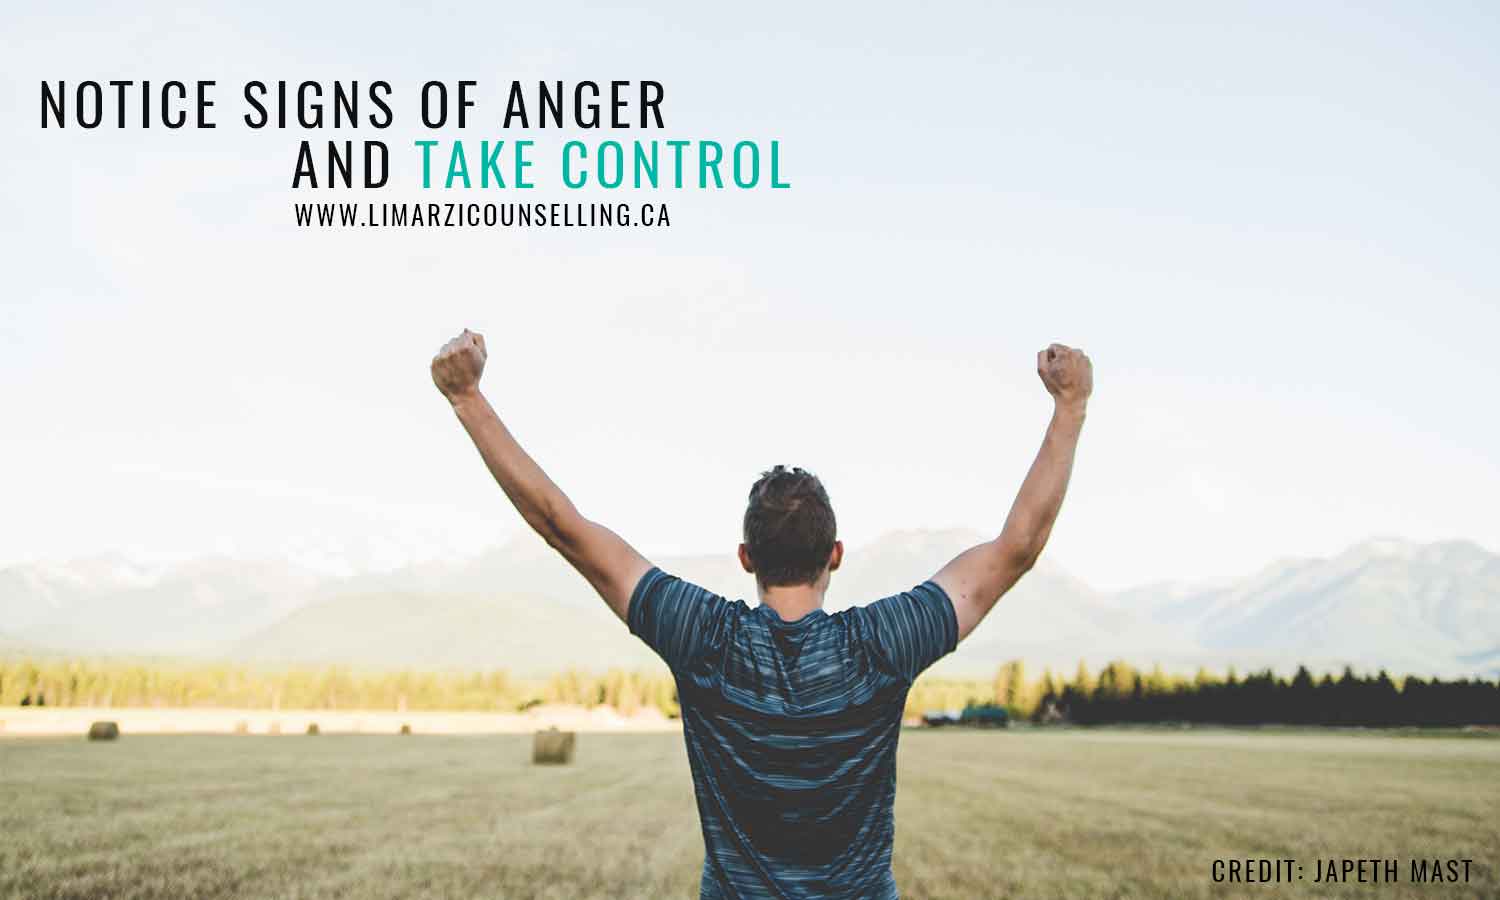 Notice signs of anger and take control